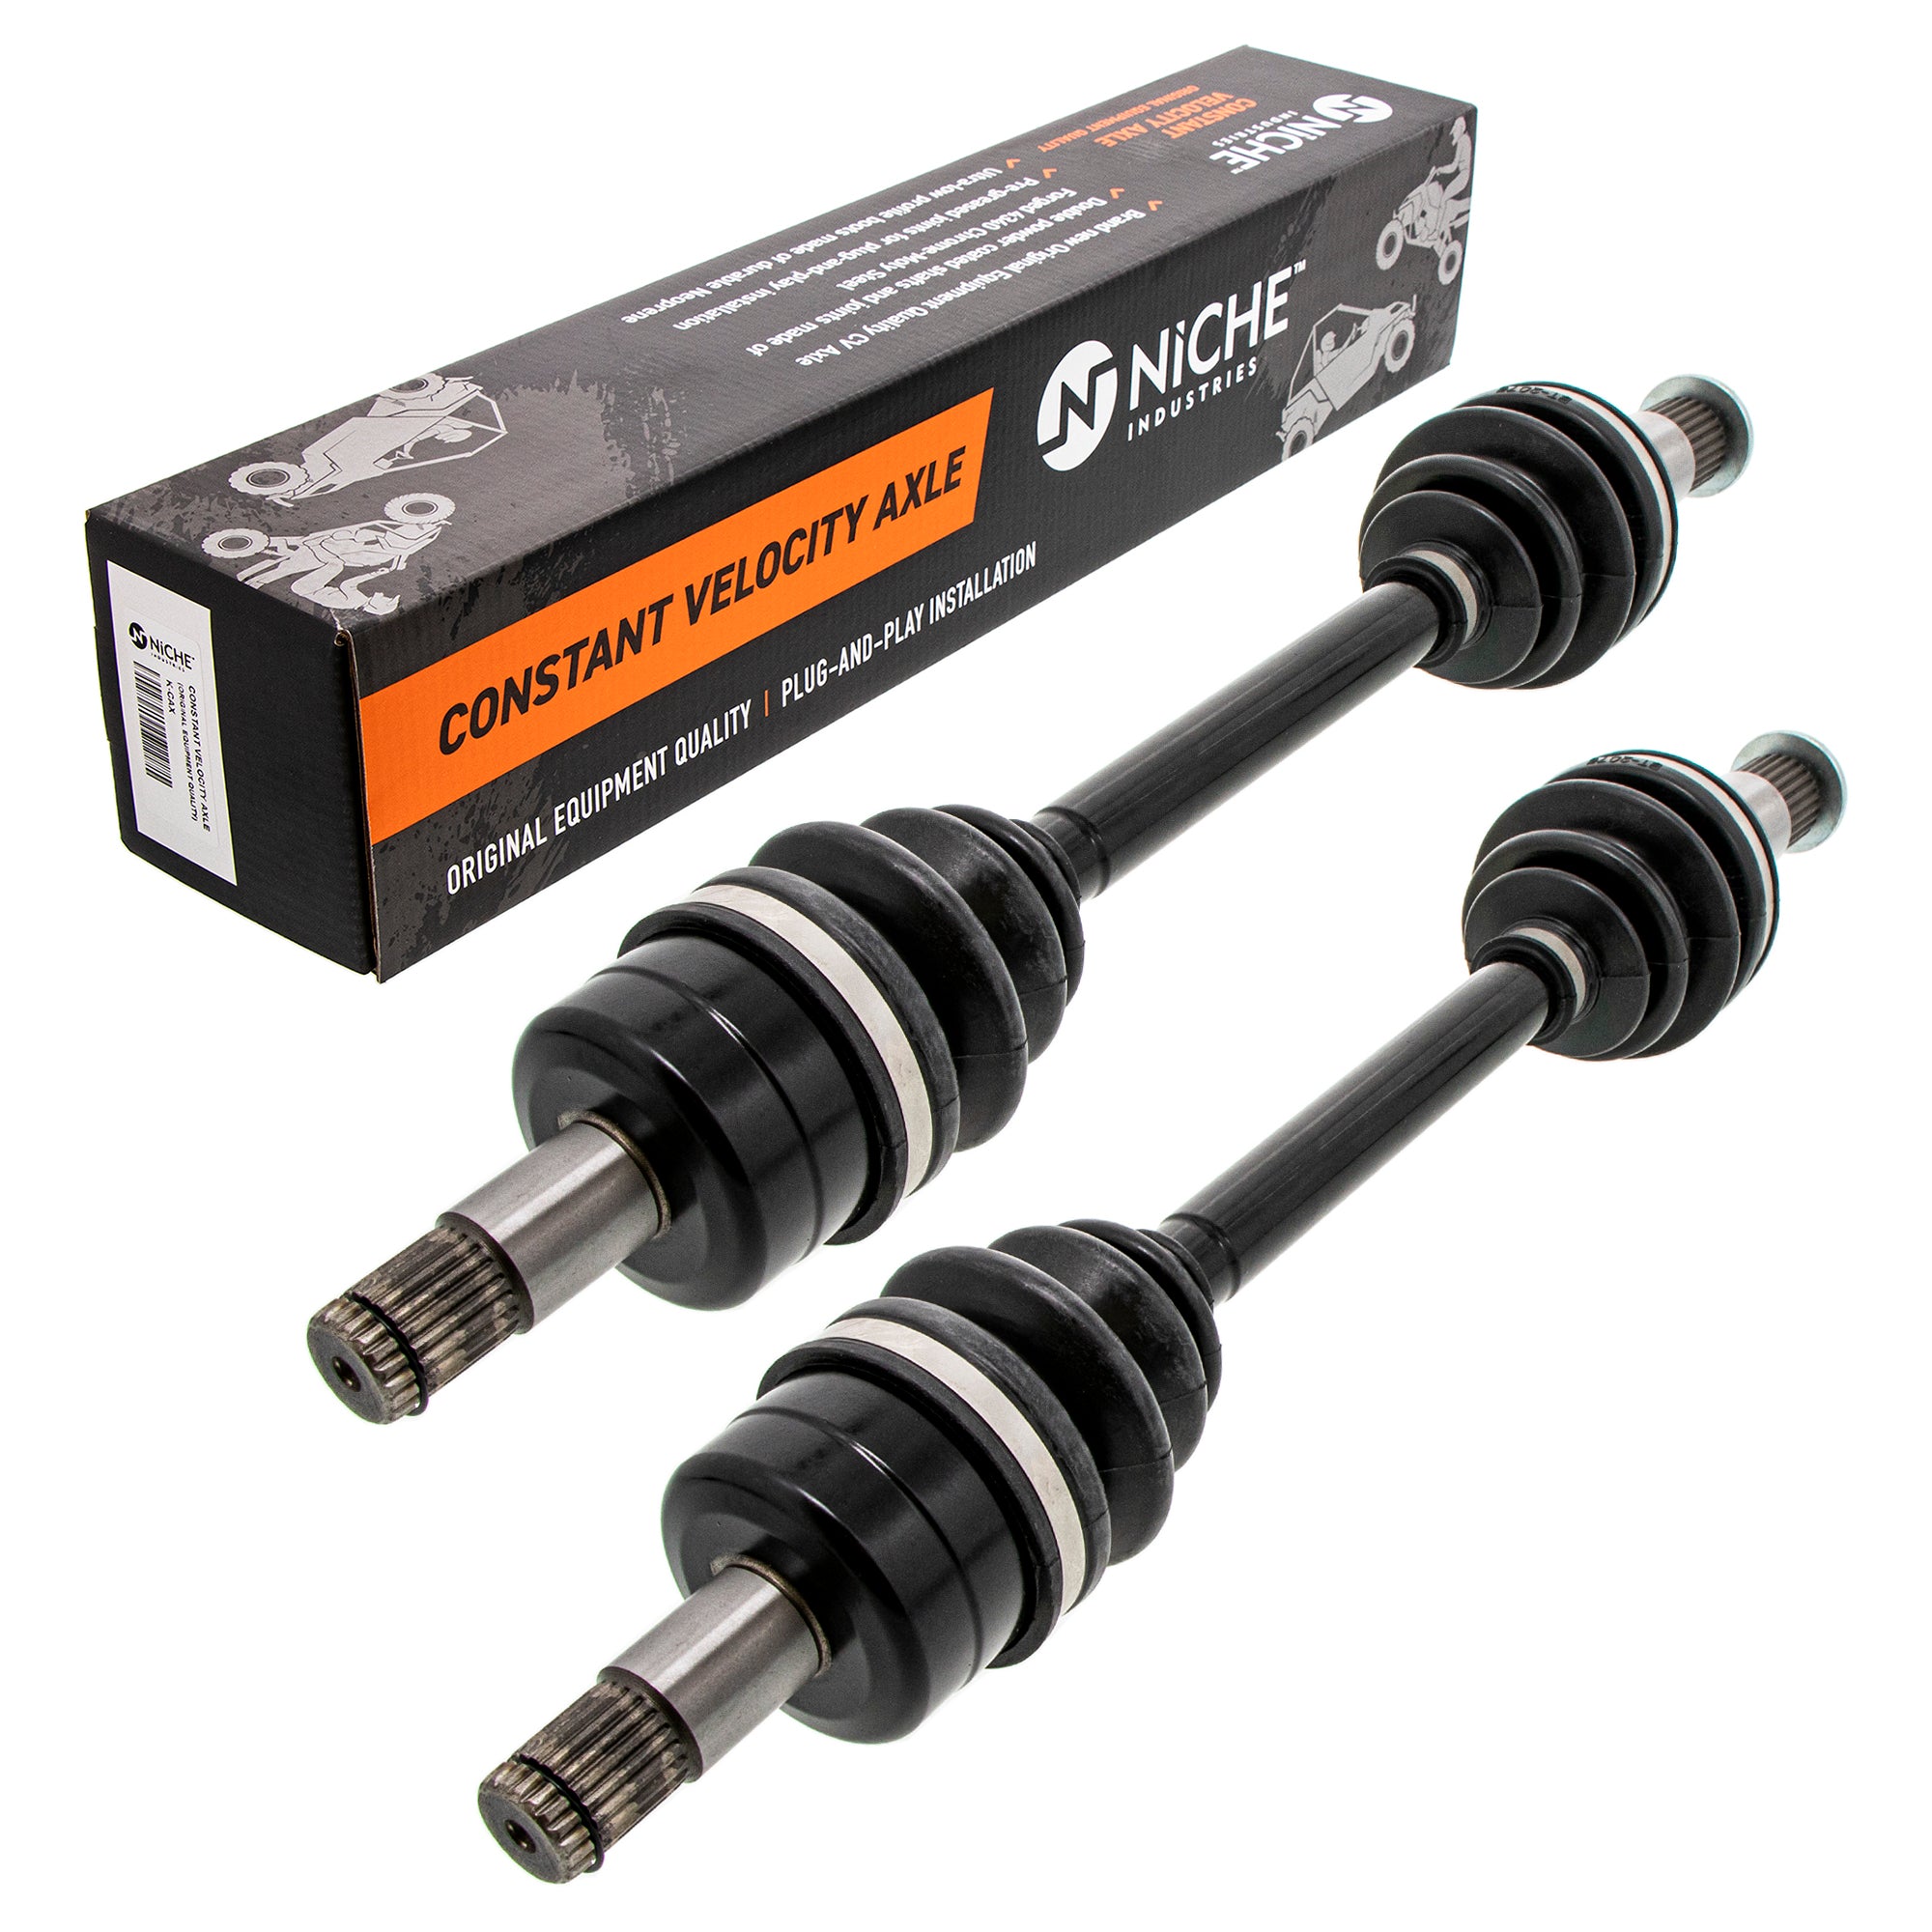 High Strength Front CV Axle Set 2-Pack for zOTHER Grizzly 3B4-2518E-00-00 3B4-2510J-00-00 NICHE 519-KCA2369X